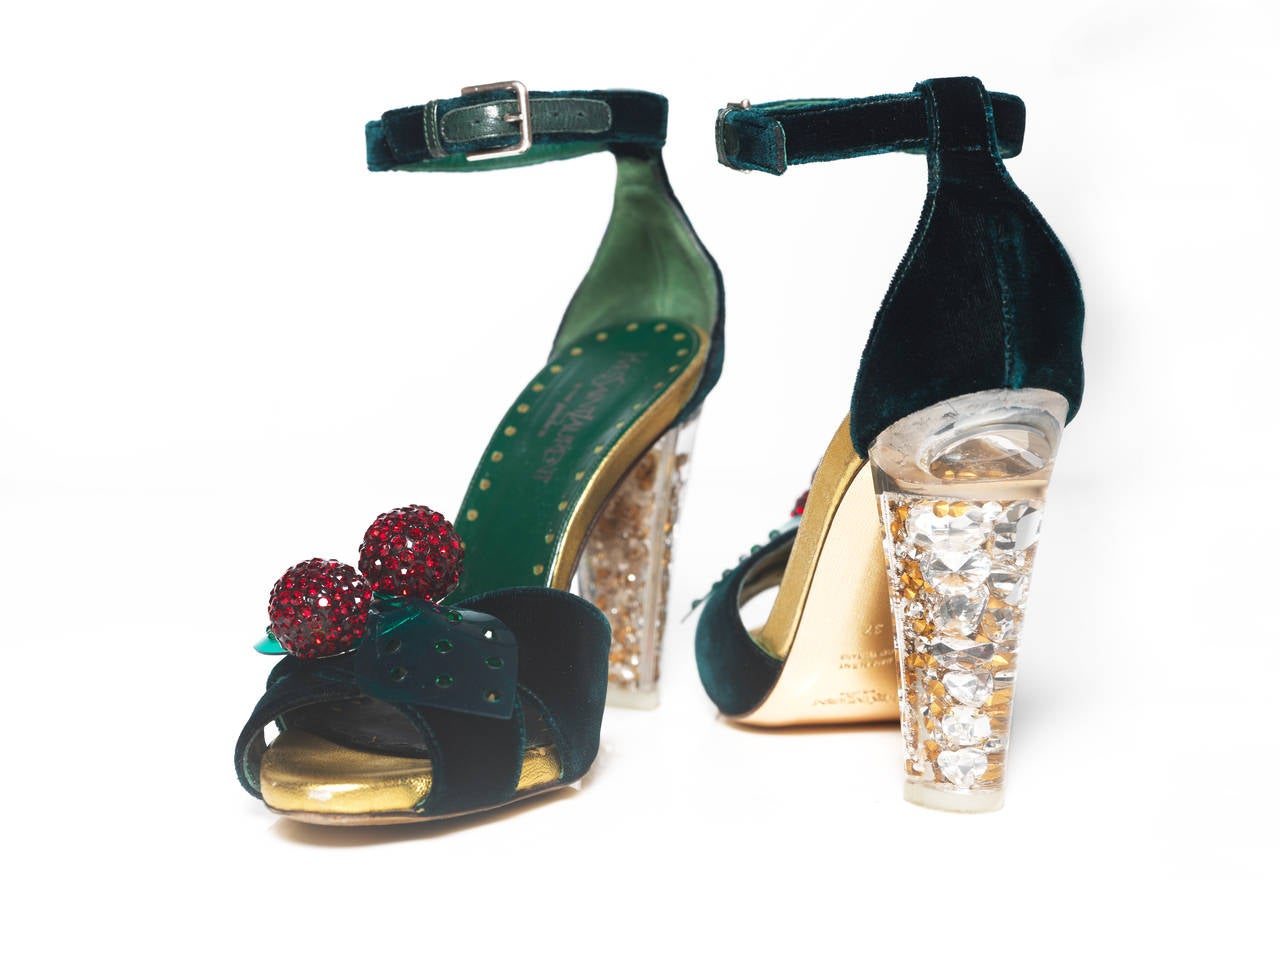 Yves Saint Laurent hunter green velvet cherry sandals with crystal embellished clear resin chunky heels, removable crystal embellished cherry applique at toes and ankle strap and silver-tone buckle closure.

Heels: 4.25